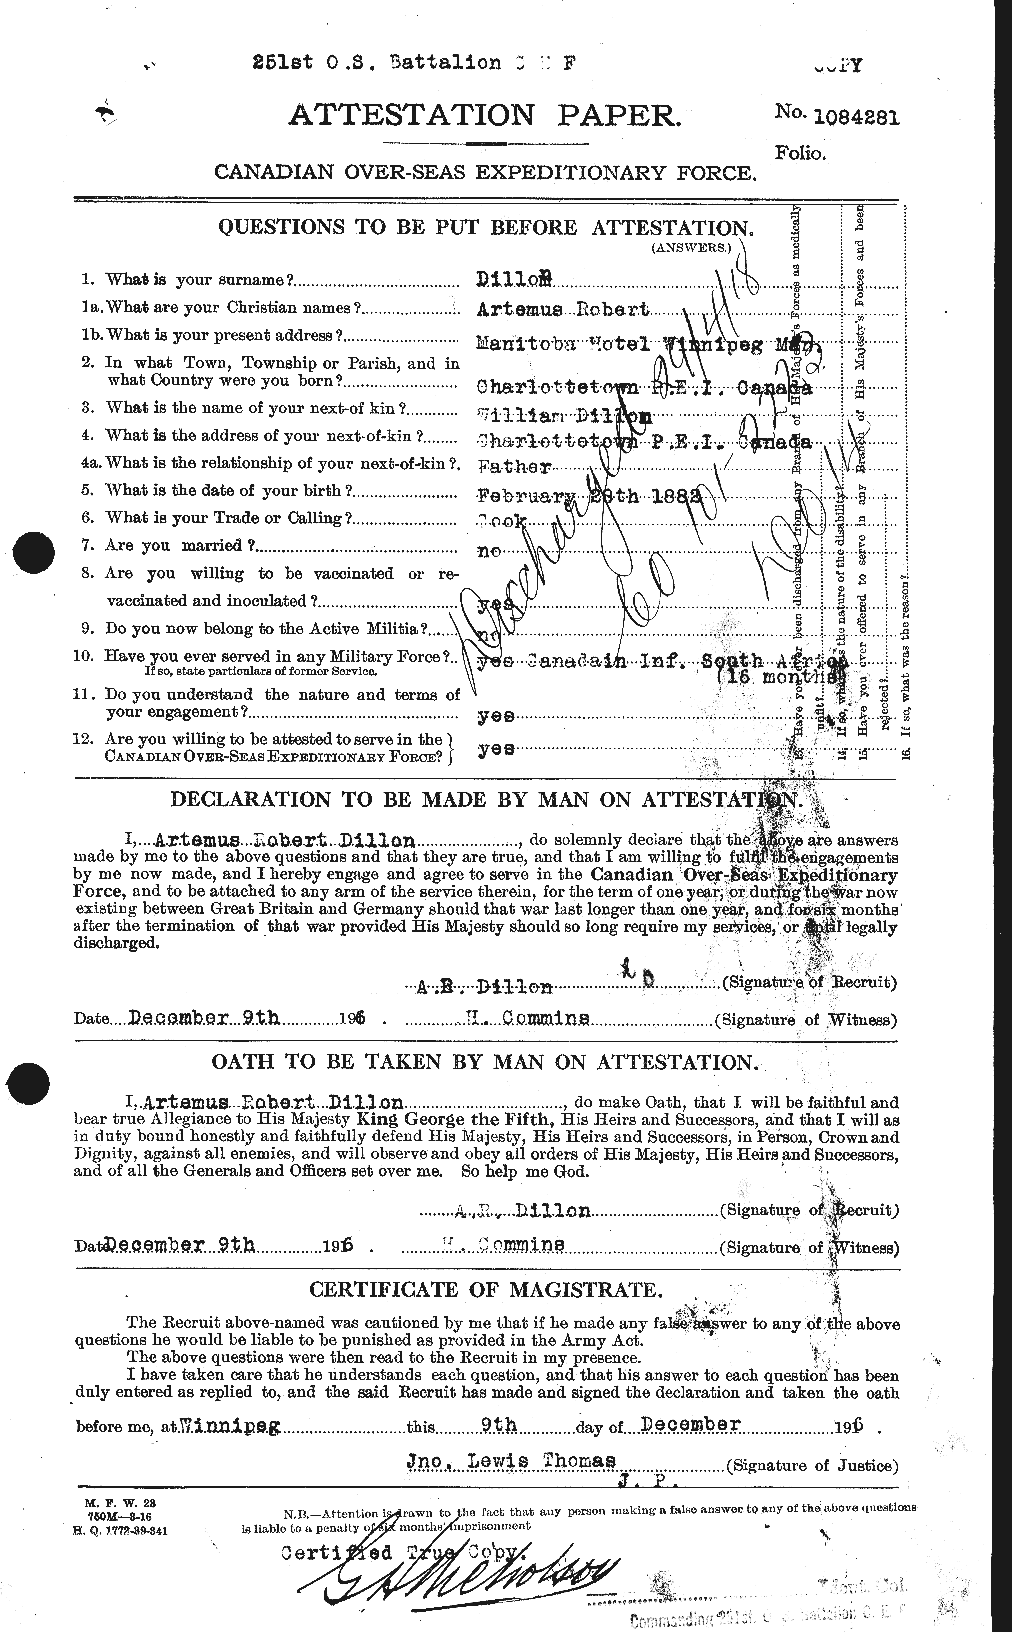 Personnel Records of the First World War - CEF 293650a